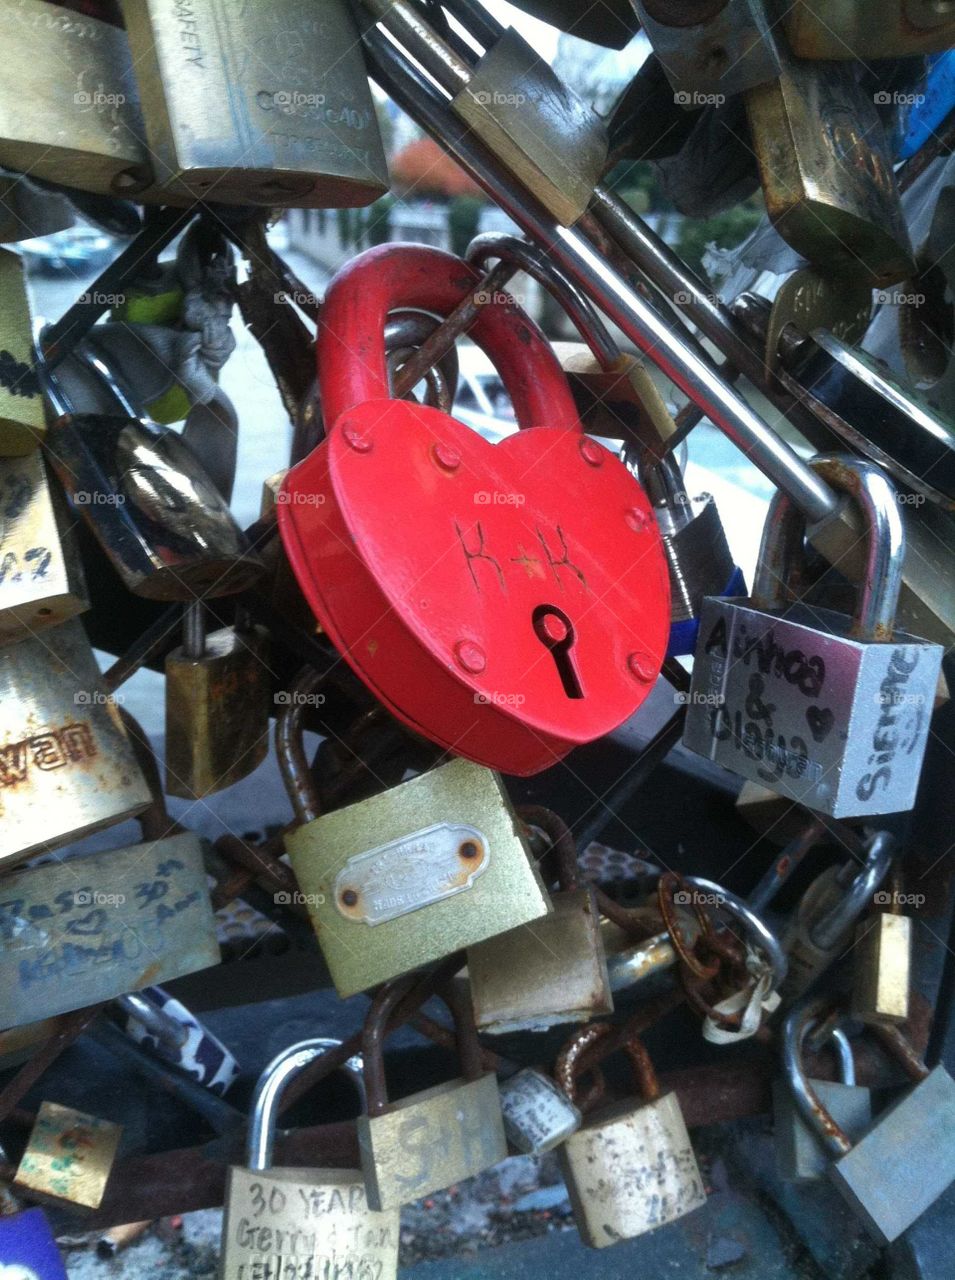 The lock bridge in Paris is something to see. The love in the air is electric!